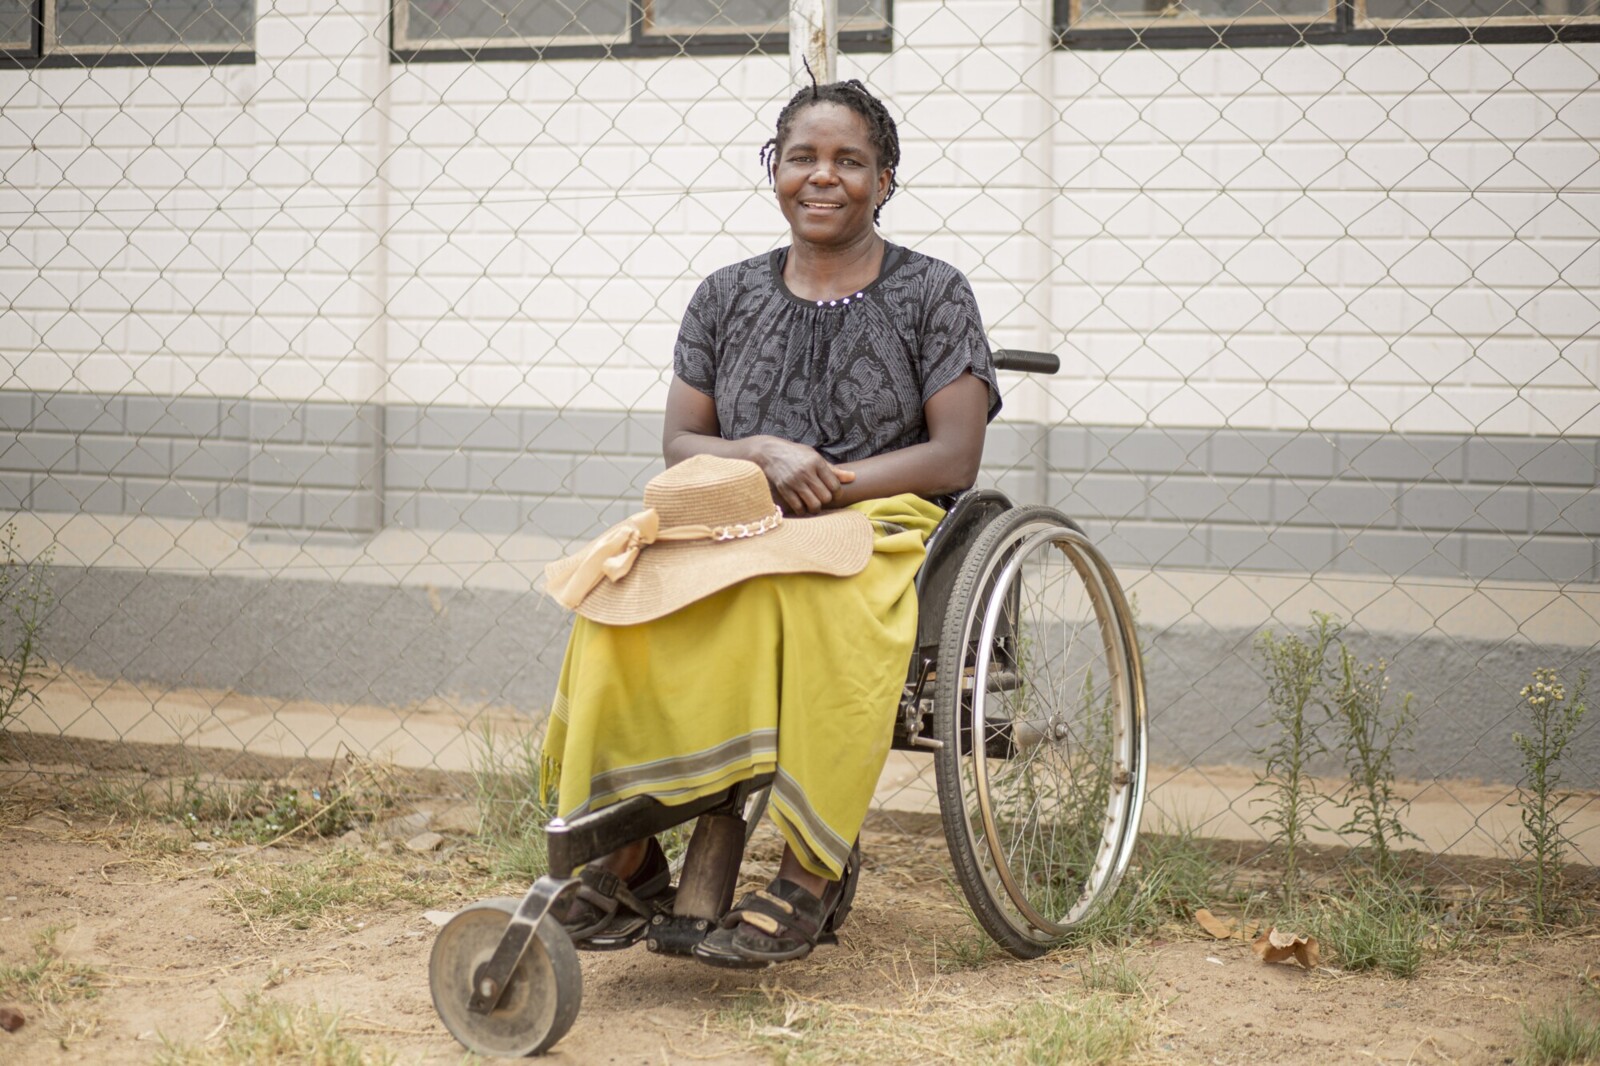 A smiling woman sitting in a wheelchair outdoors